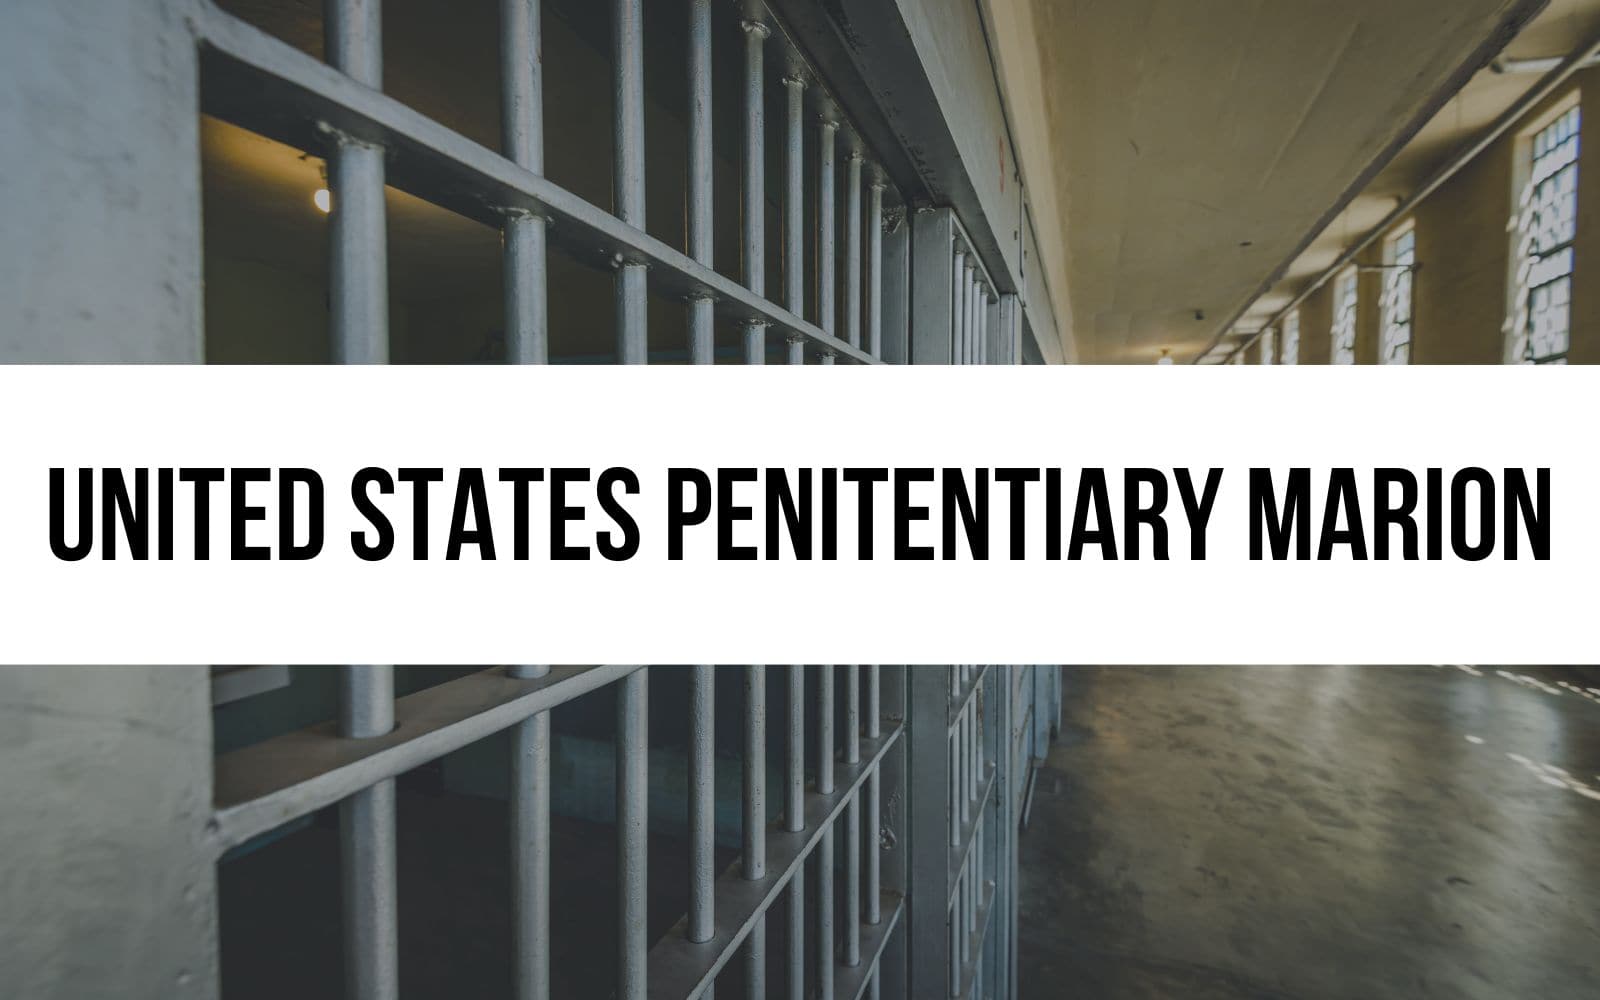 United States Penitentiary Marion